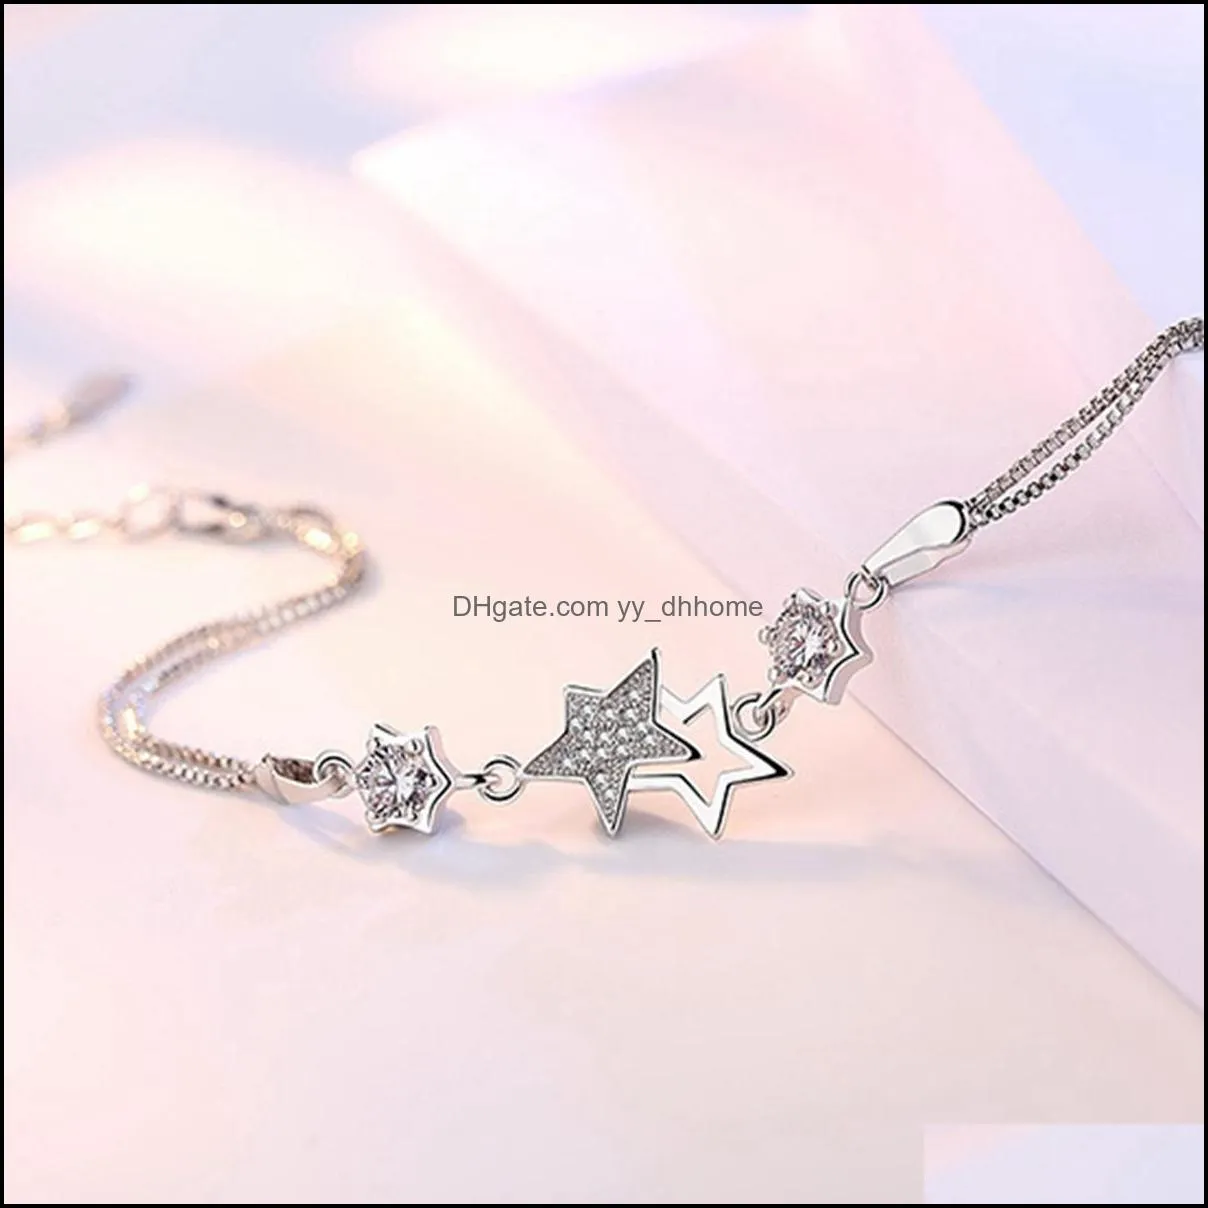 women crystal star link bracelets adjustable purple clear cz rhinestone anklet bangle for party wedding valentines mother day gift